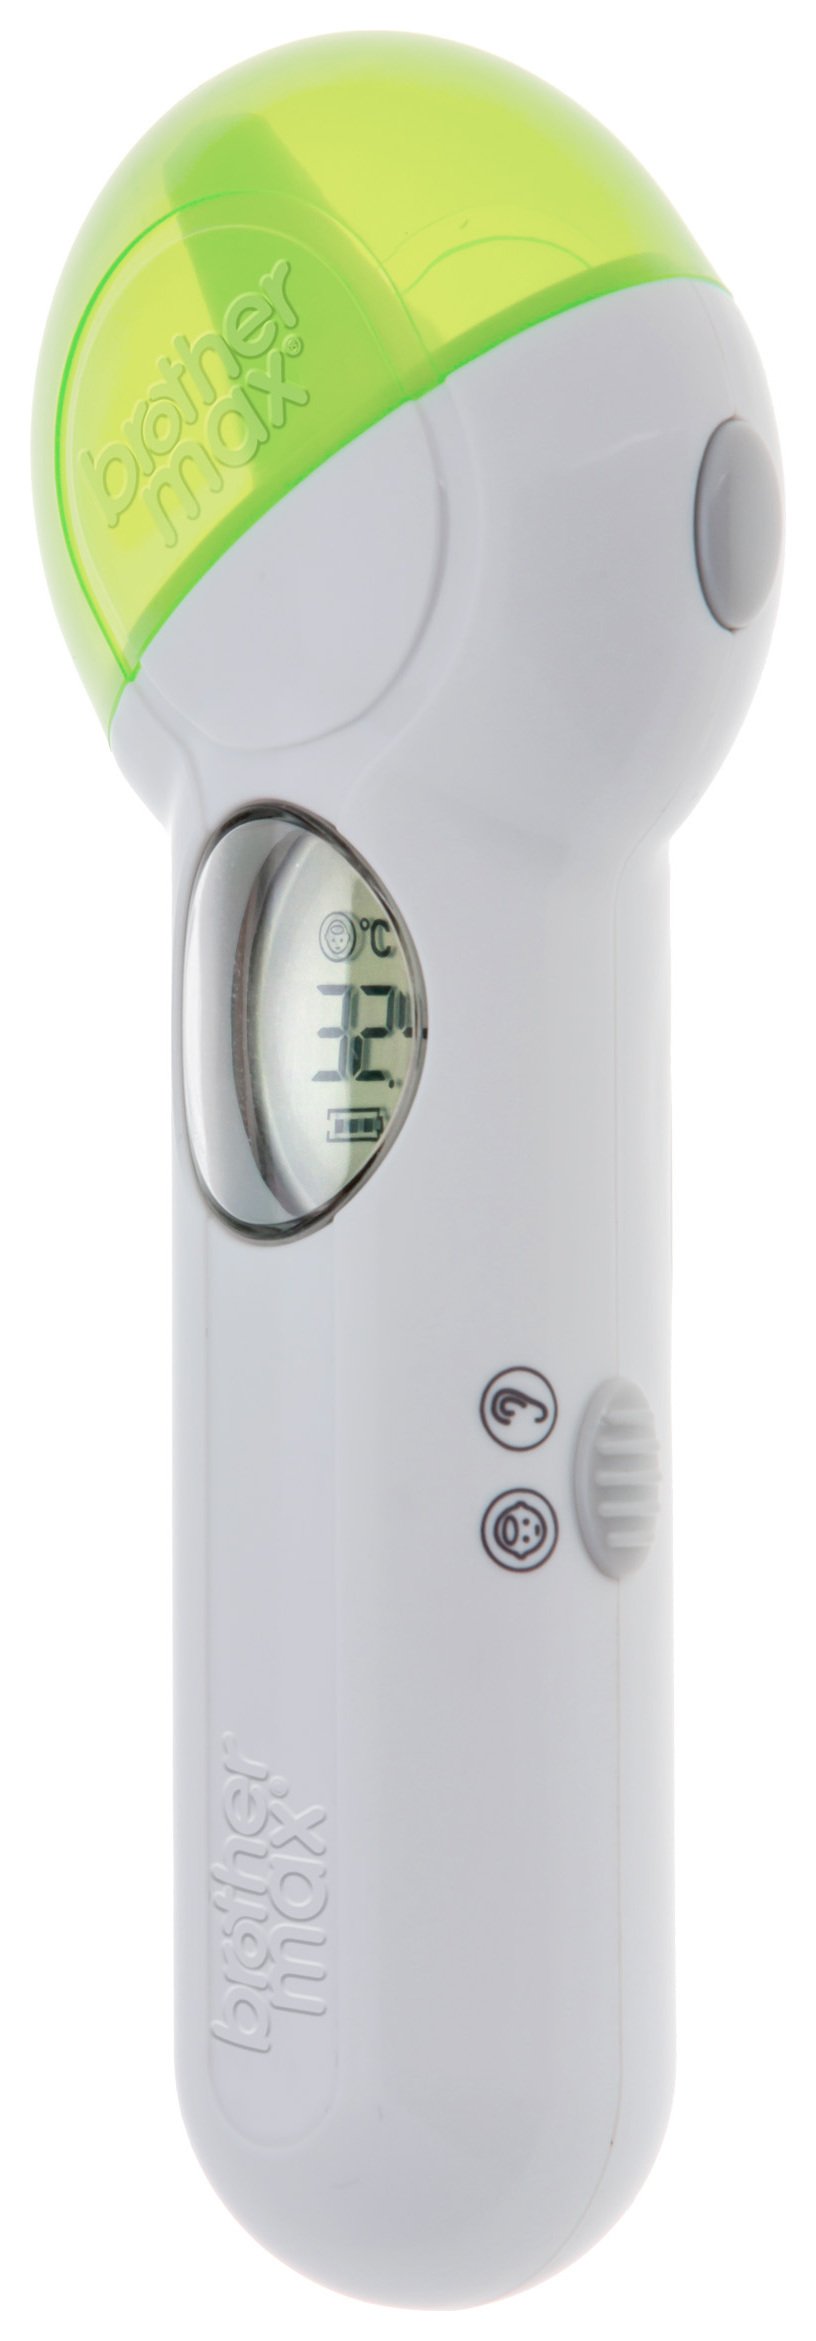 Brother Max 2 in 1 Thermometer